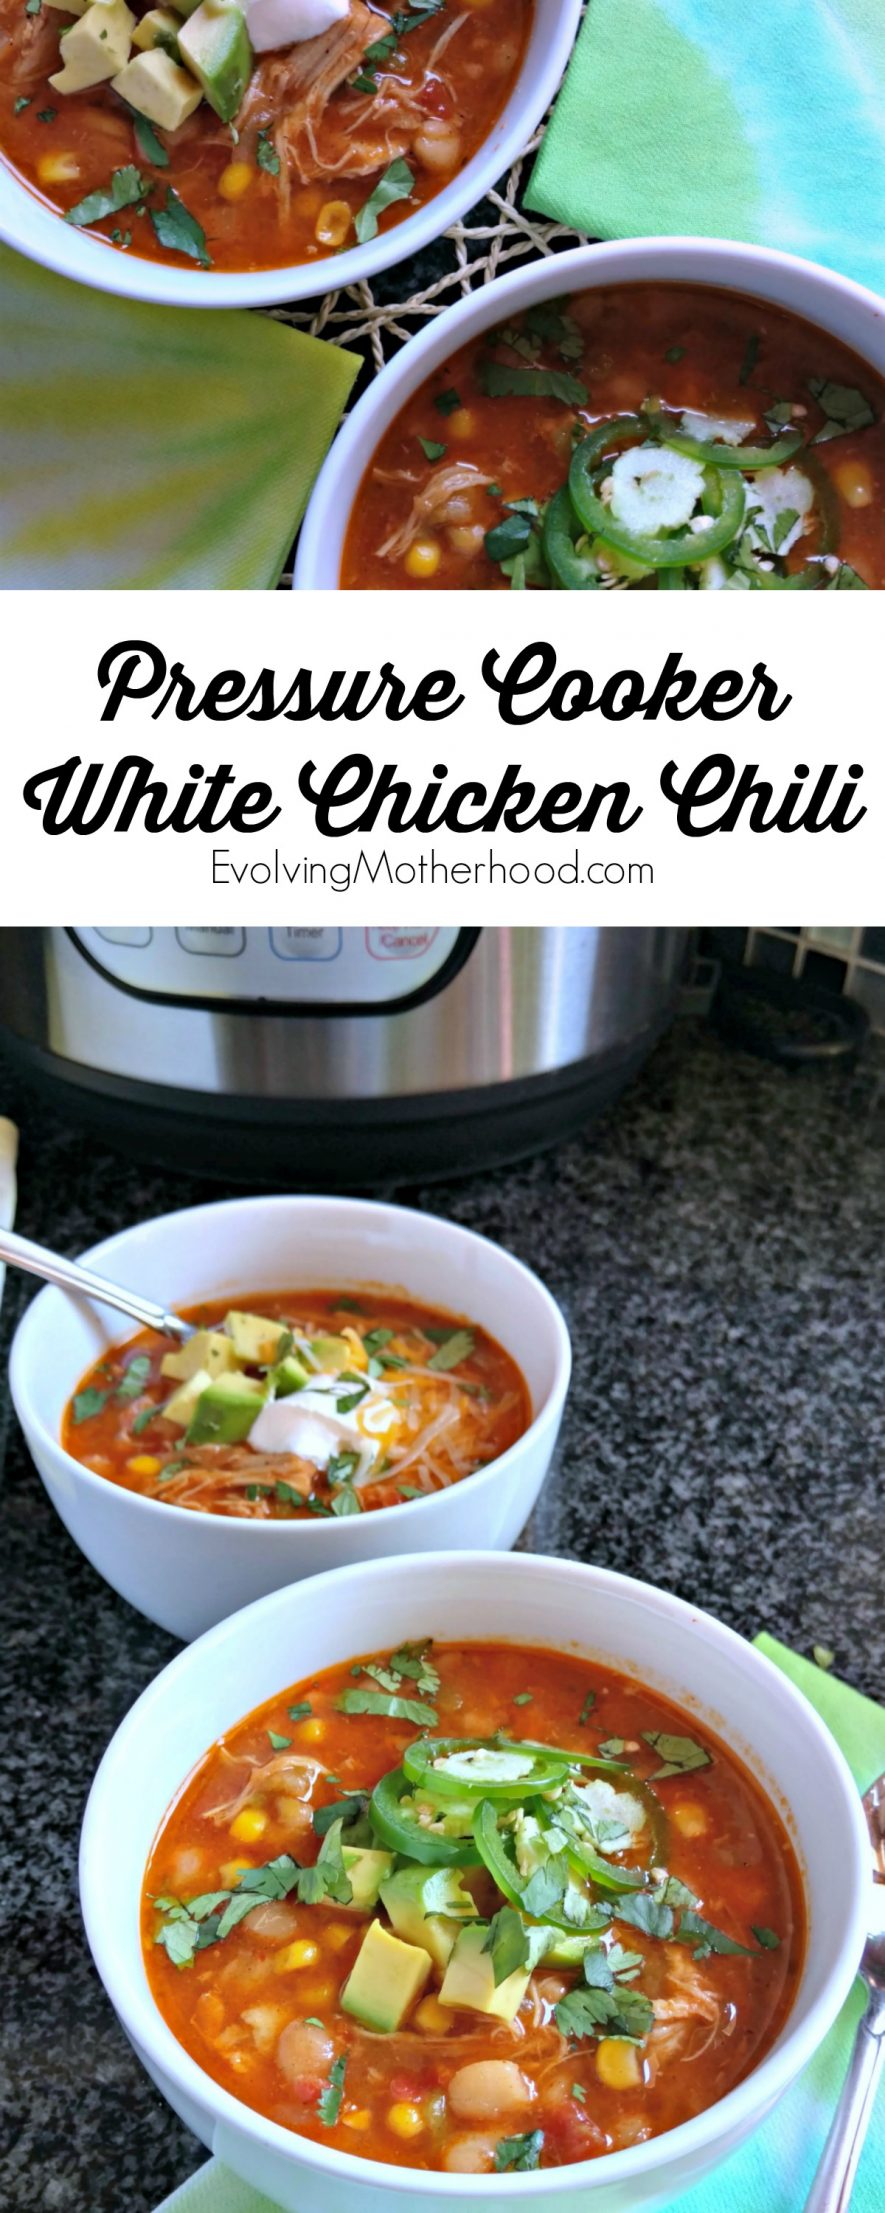 This is the best pressure cooker chicken chili recipe out there! So yummy! // evolvingmotherhood.com